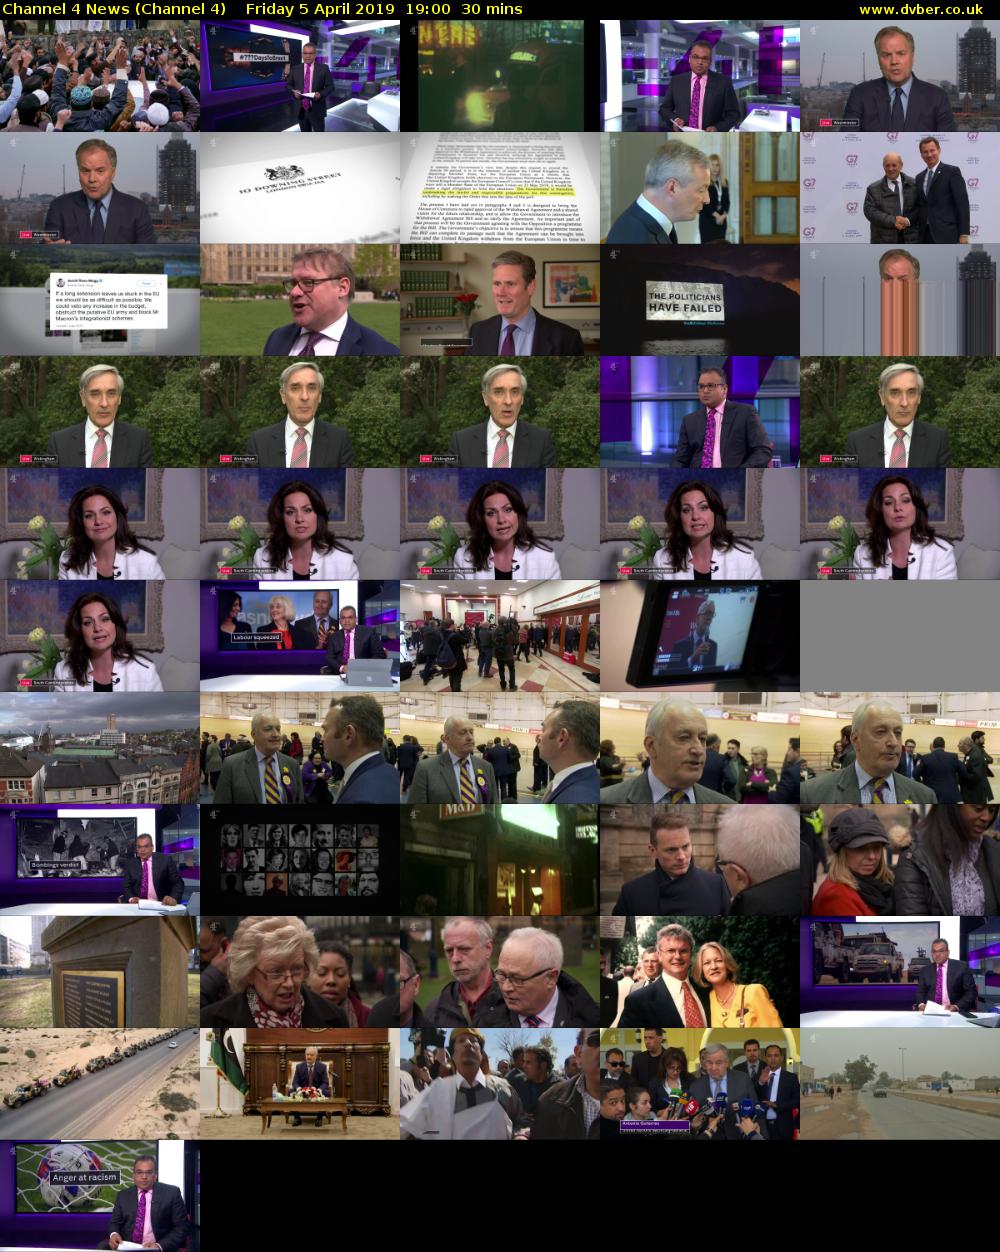 Channel 4 News (Channel 4) Friday 5 April 2019 19:00 - 19:30